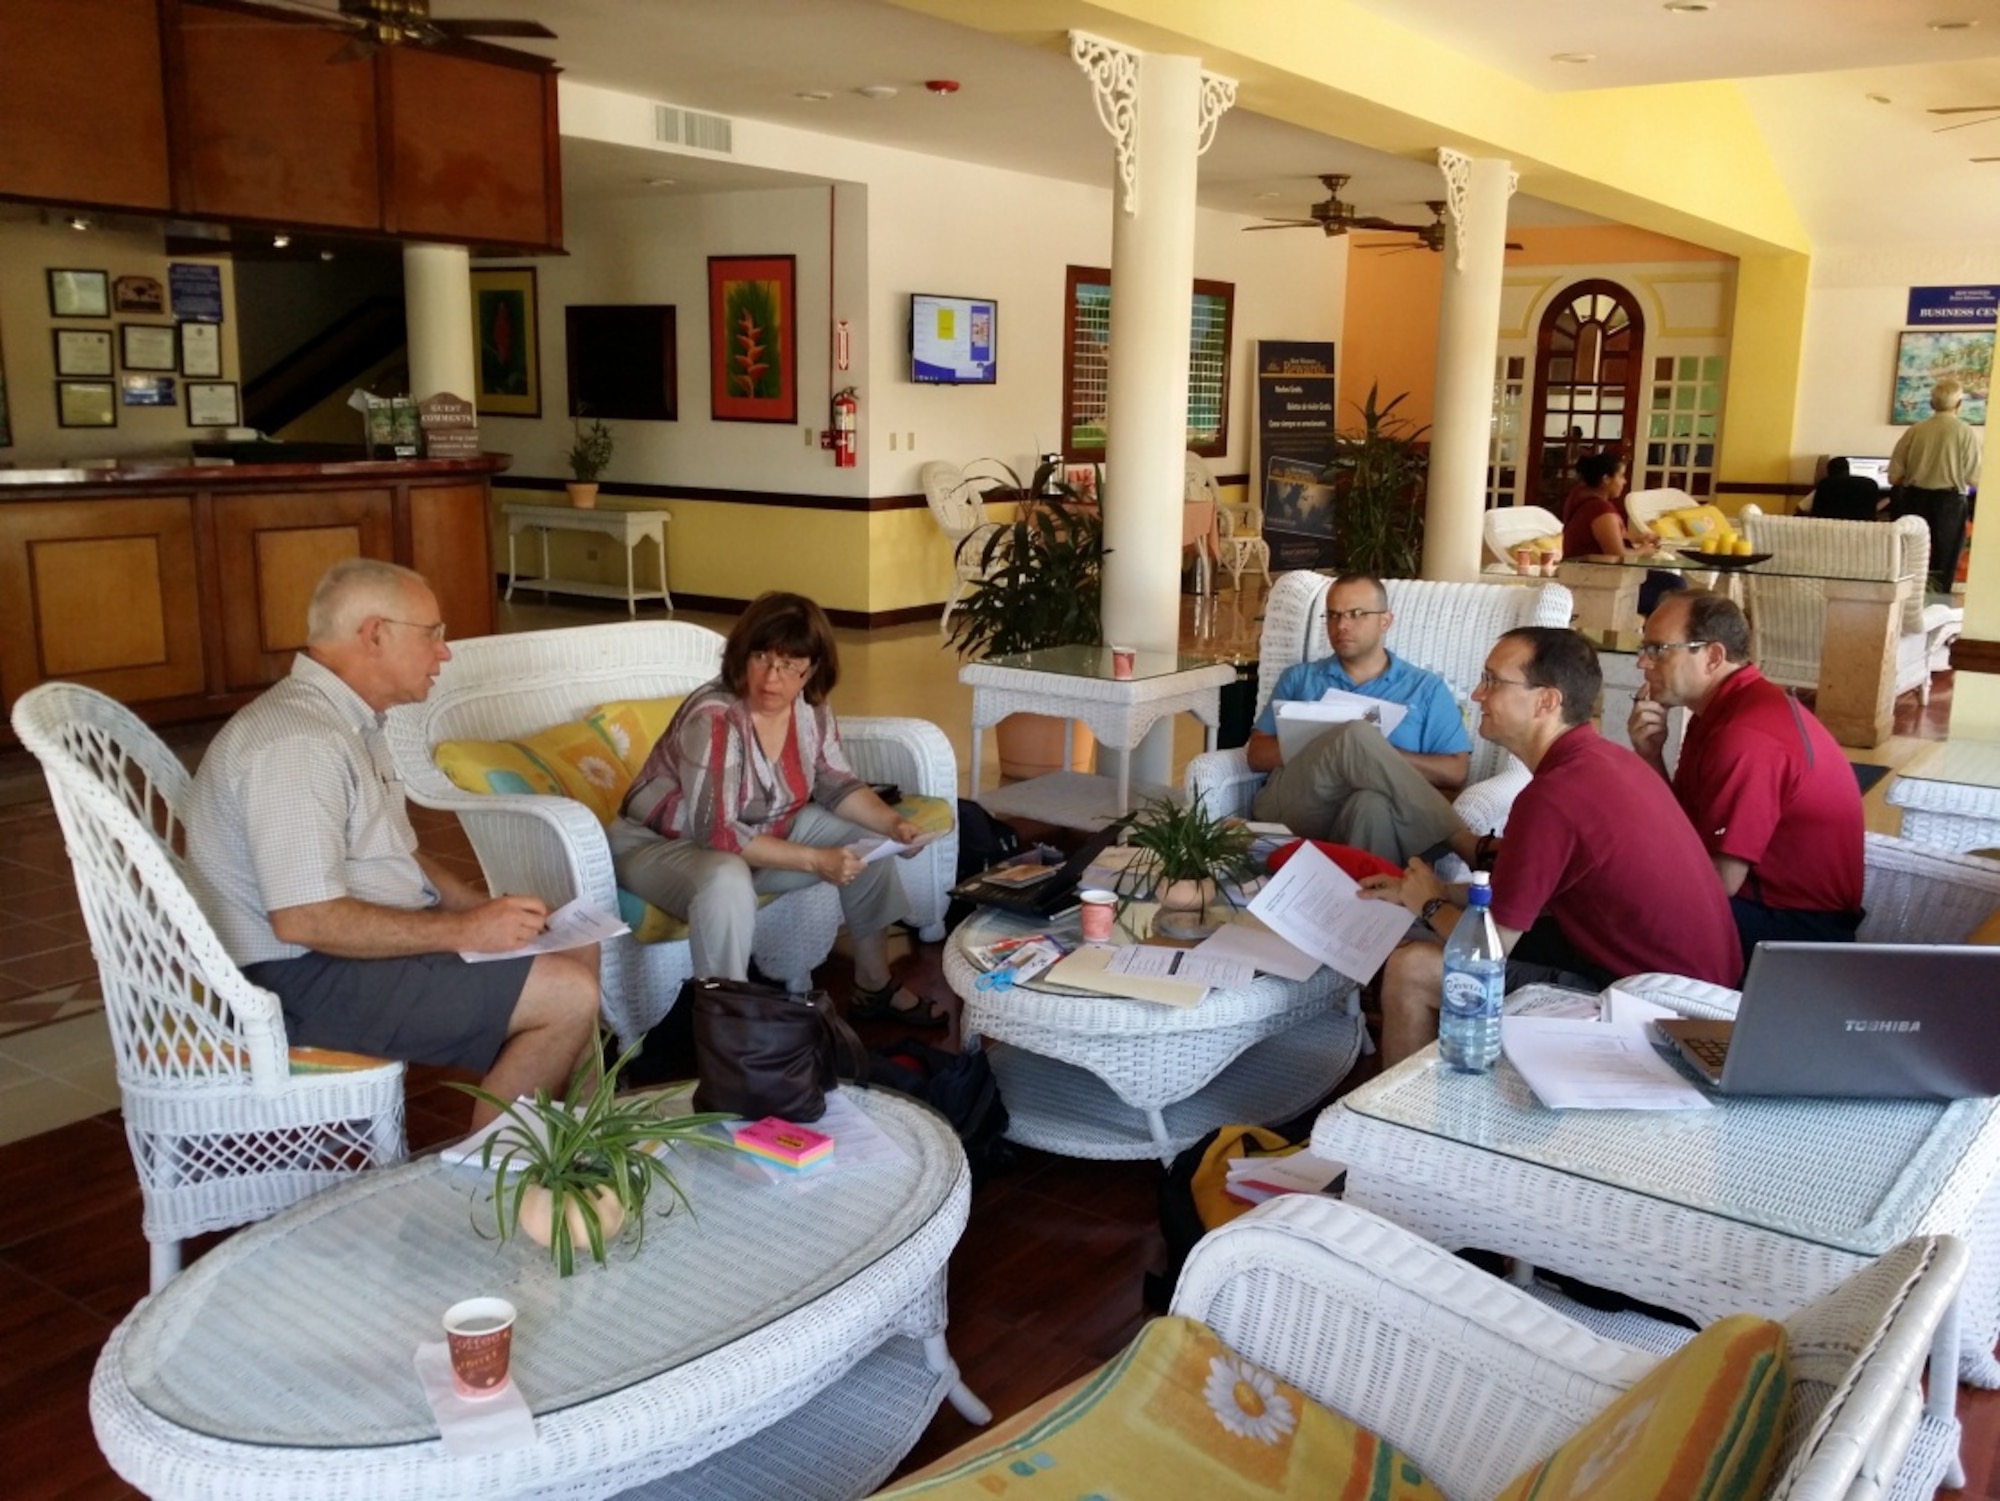 Dr. Robert Persons, Dr. Lesley Atwood, Dr. Ricardo Sequeira, Dr. Gerry Prince and Dr. Lyrad Riley discuss the agenda for the Global ALSO Instructor Course in Belize City, Belize, July 21, 2014.  (Courtesy Photo)